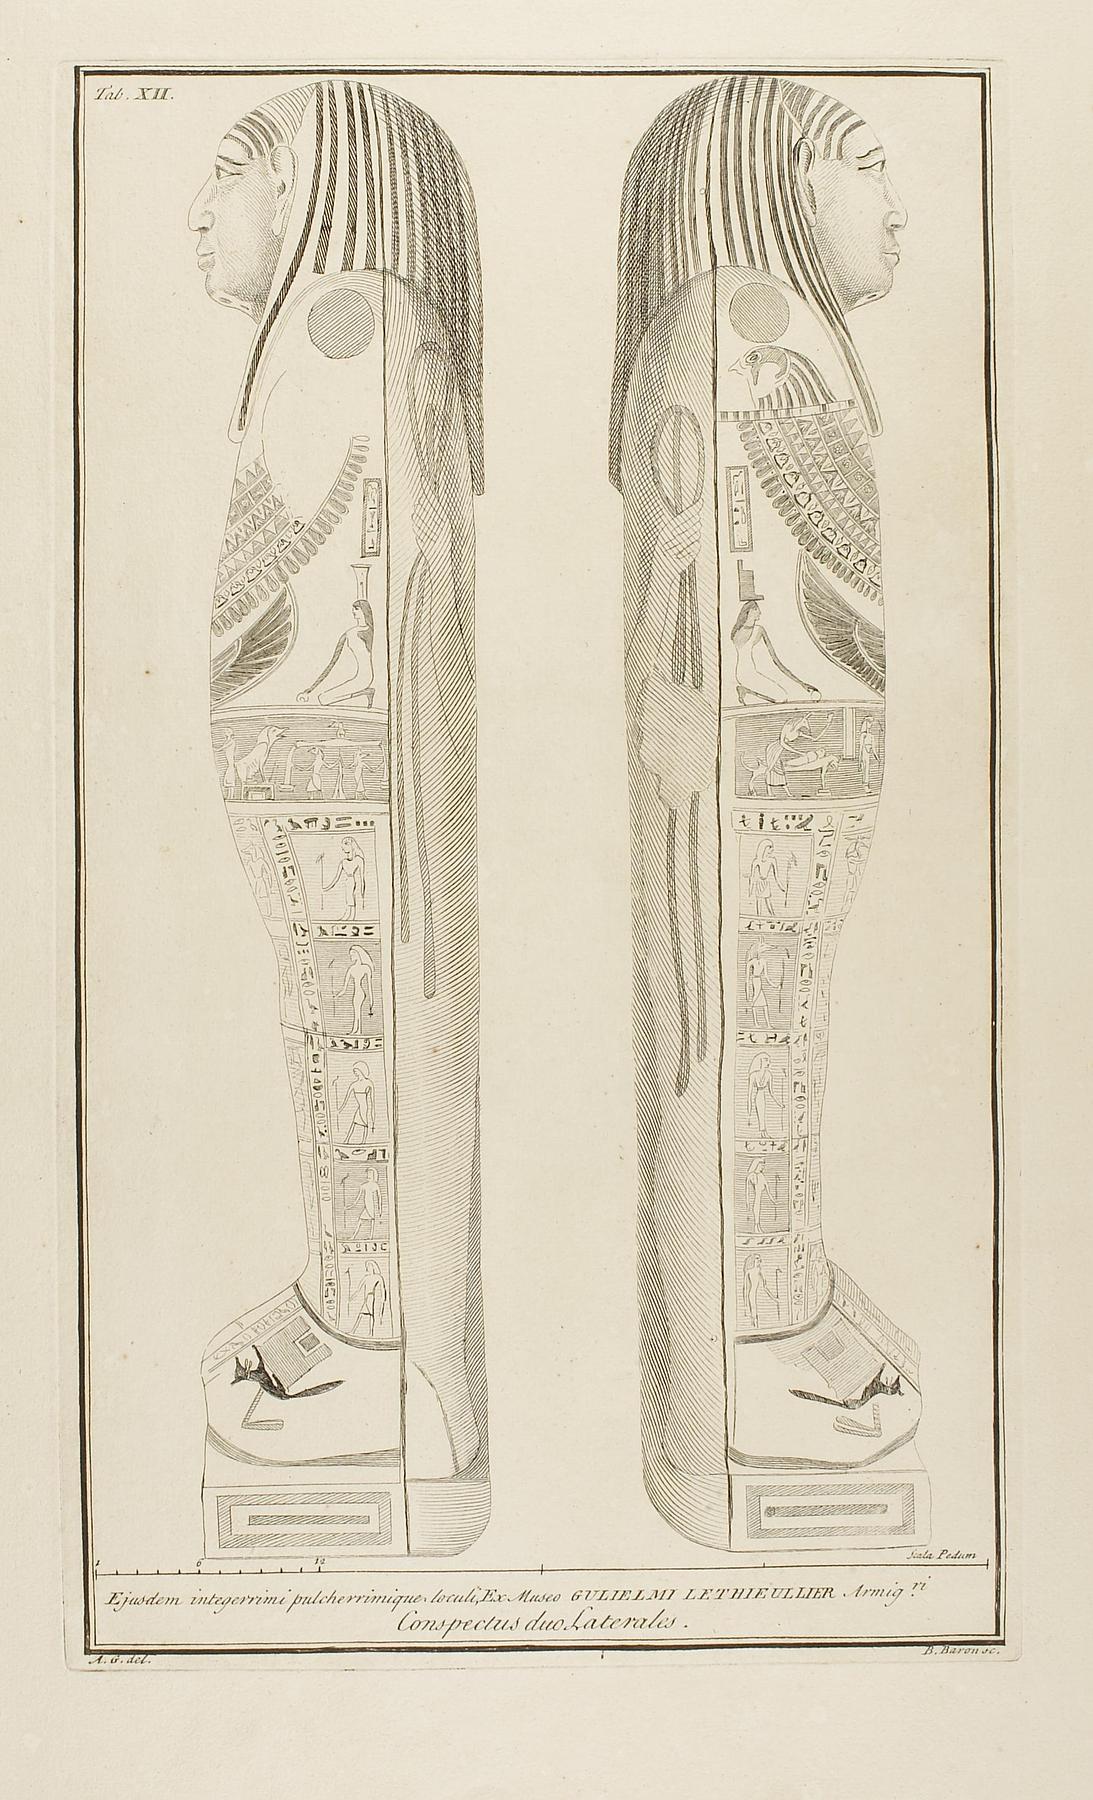 Inner-Coffin of Irtyru, views of right and left side, E1381